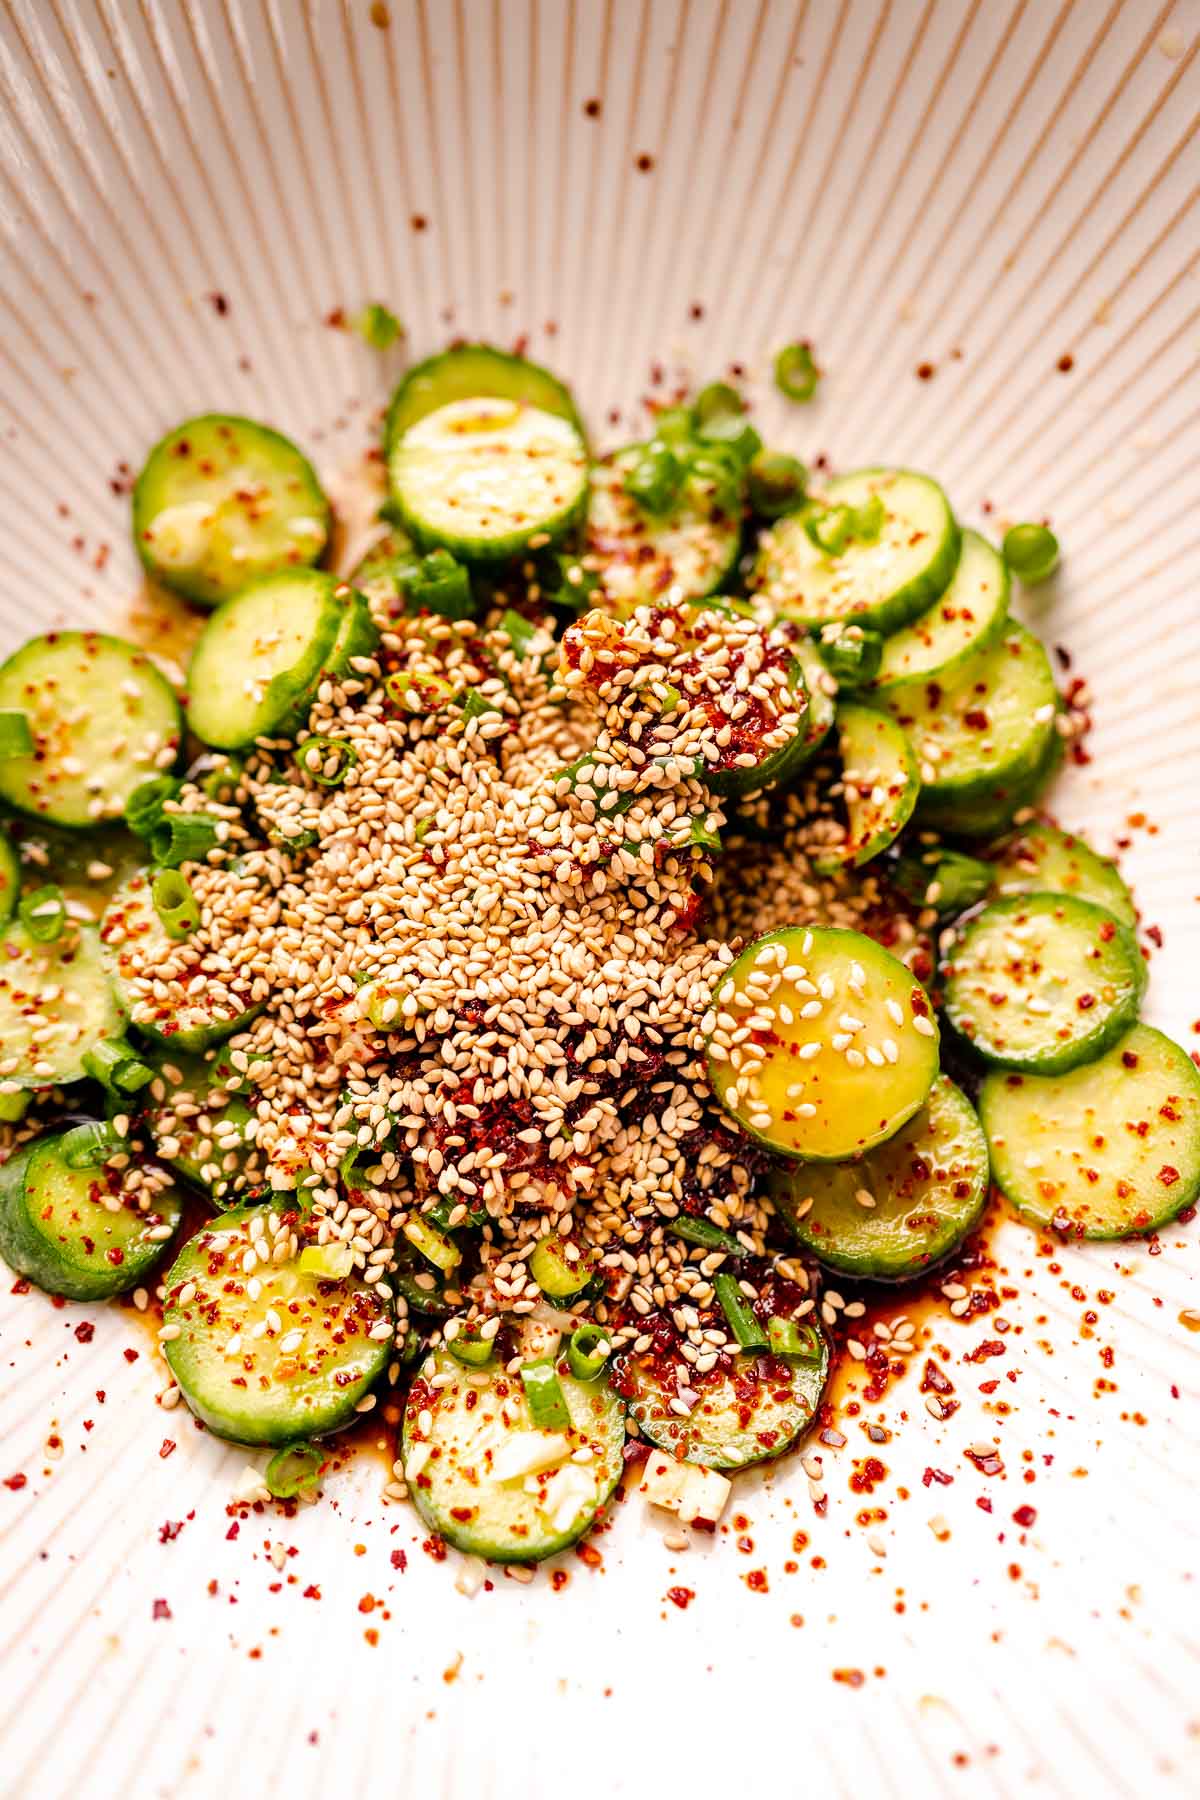 Slices of cucumber topped with sesame seeds.